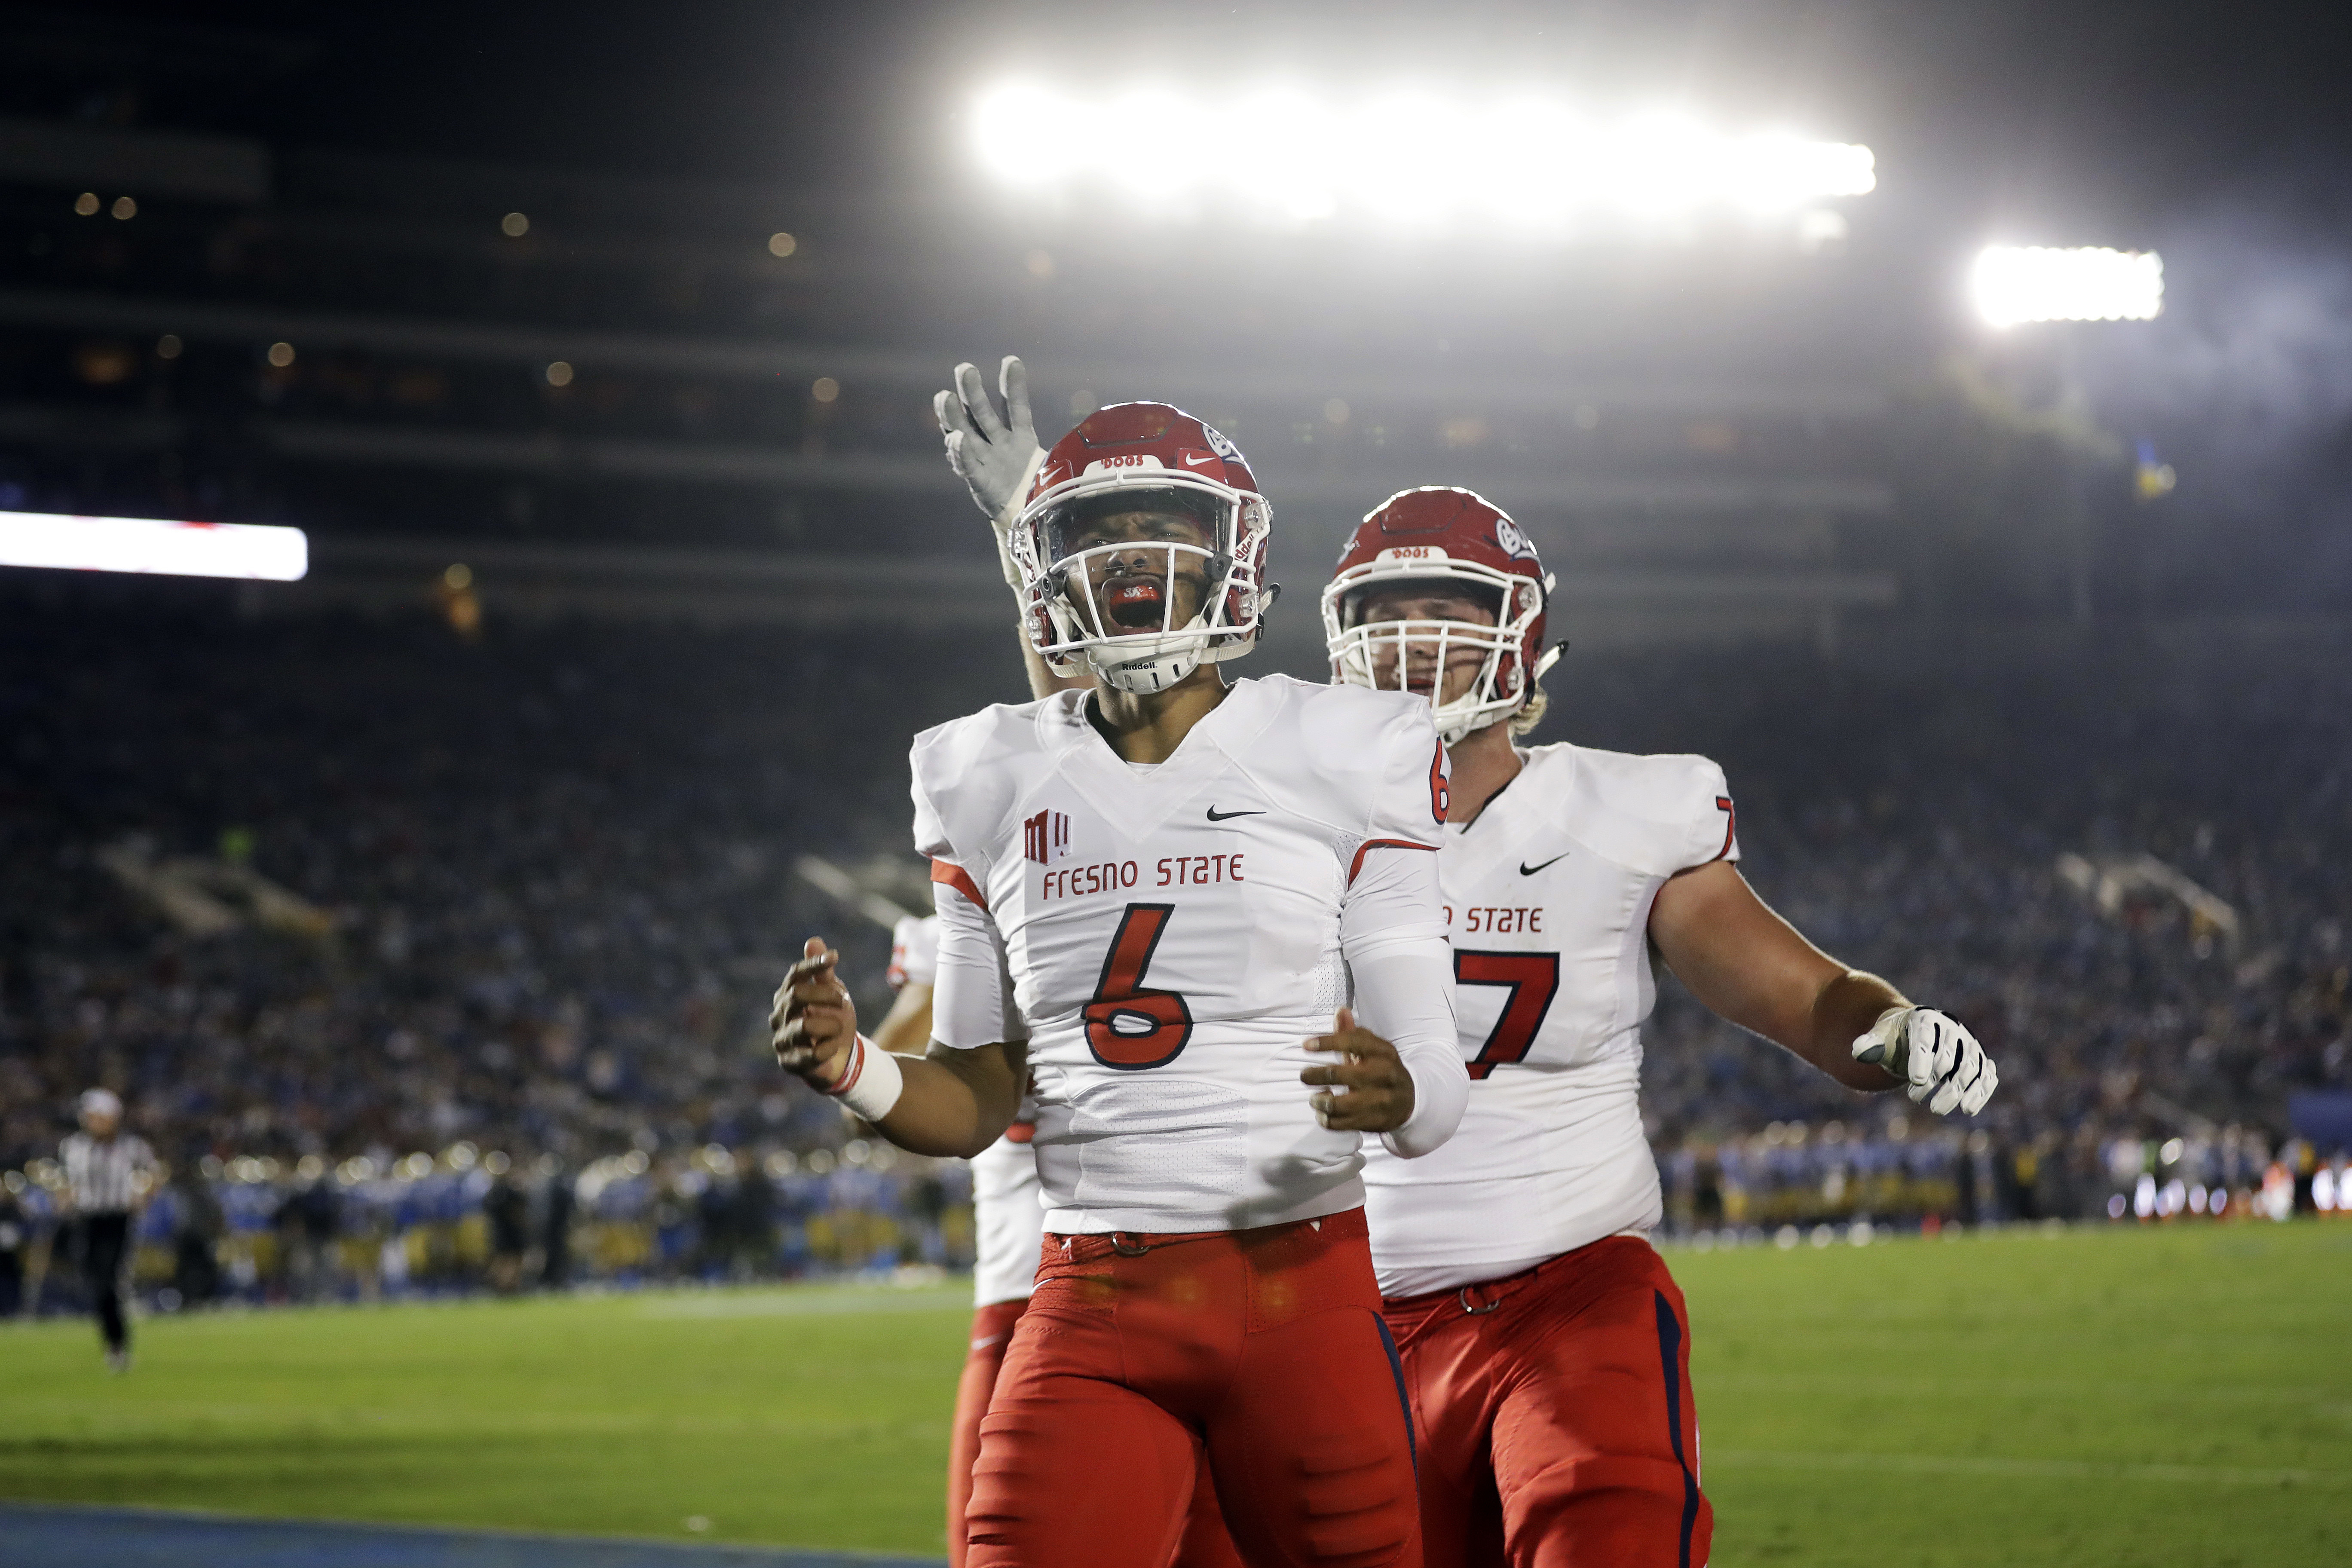 McMaryion scores 4 touchdowns to lead Fresno State over UCLA